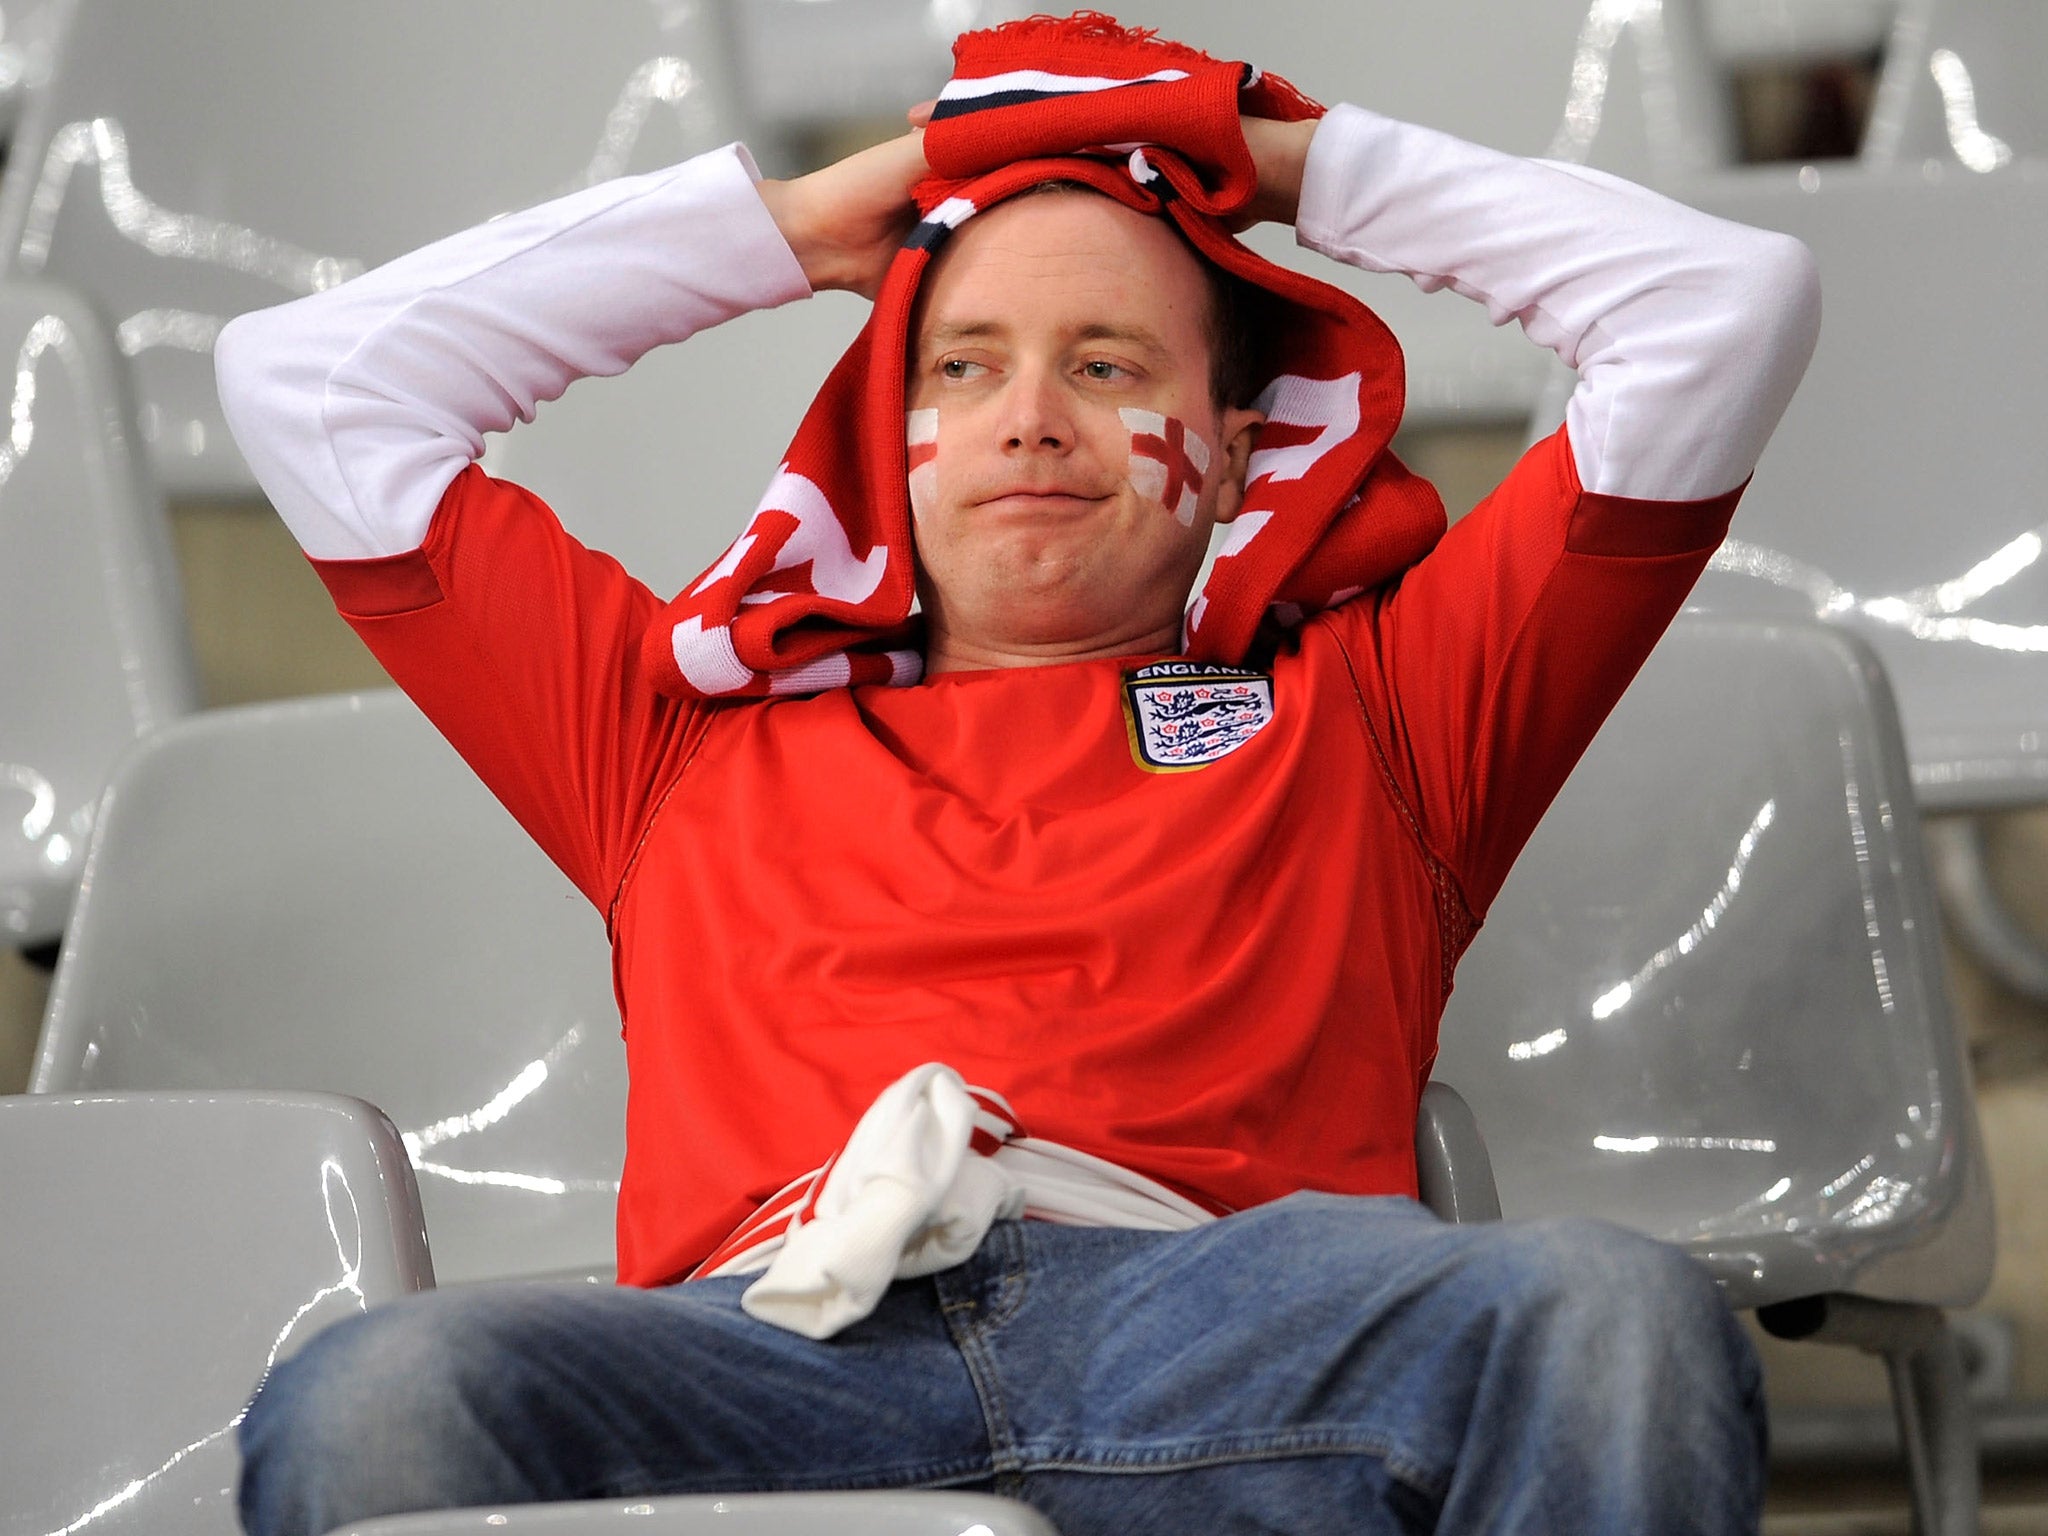 A disappointed England fan reflects on what might've been following the Three Lions' exit in South Africa four years ago